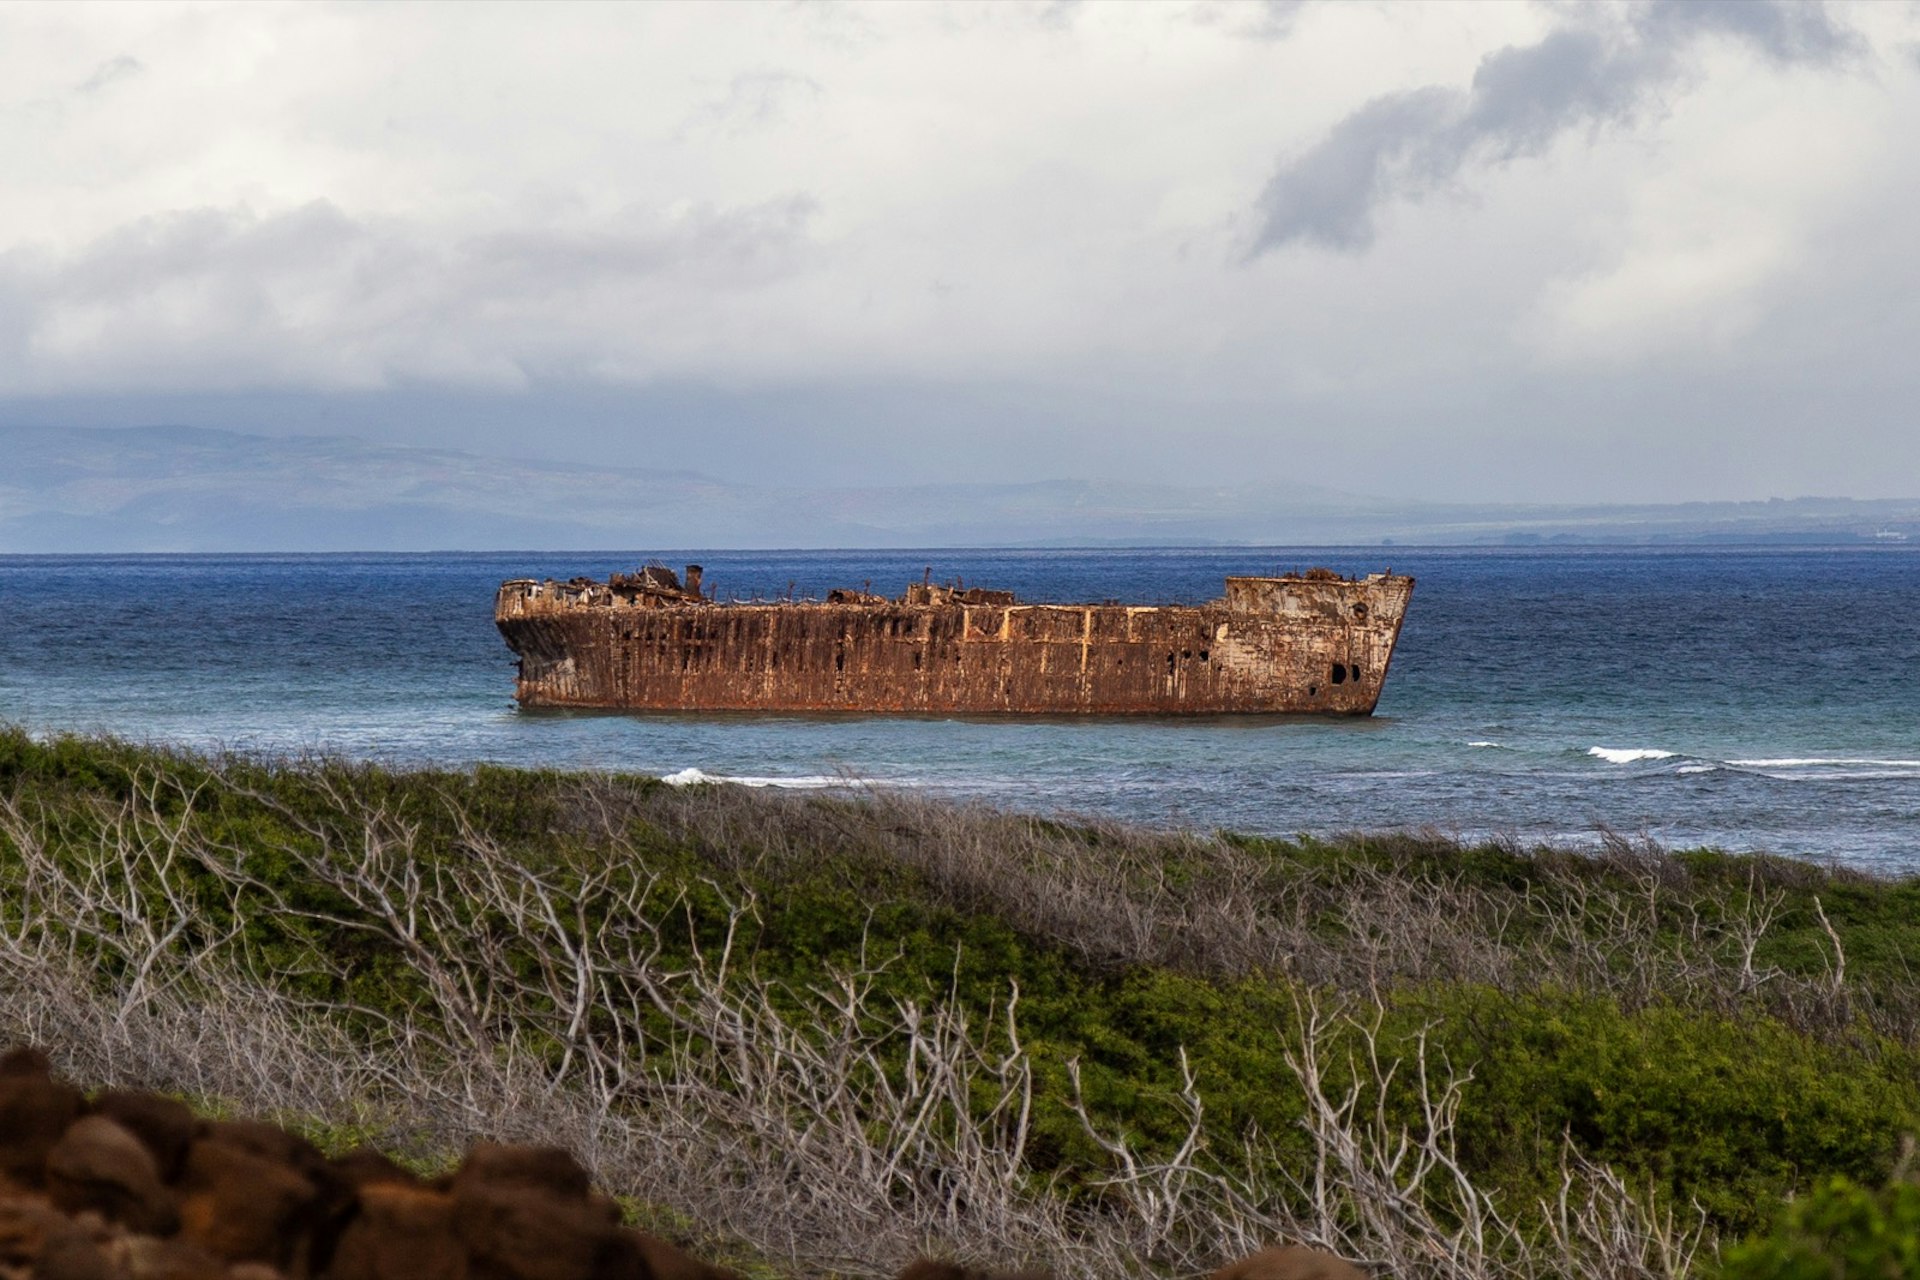 A rusted hull of a huge ship is seen just off the coast of an island, as waves crash between it and the shore and scrub brush fills the foreground